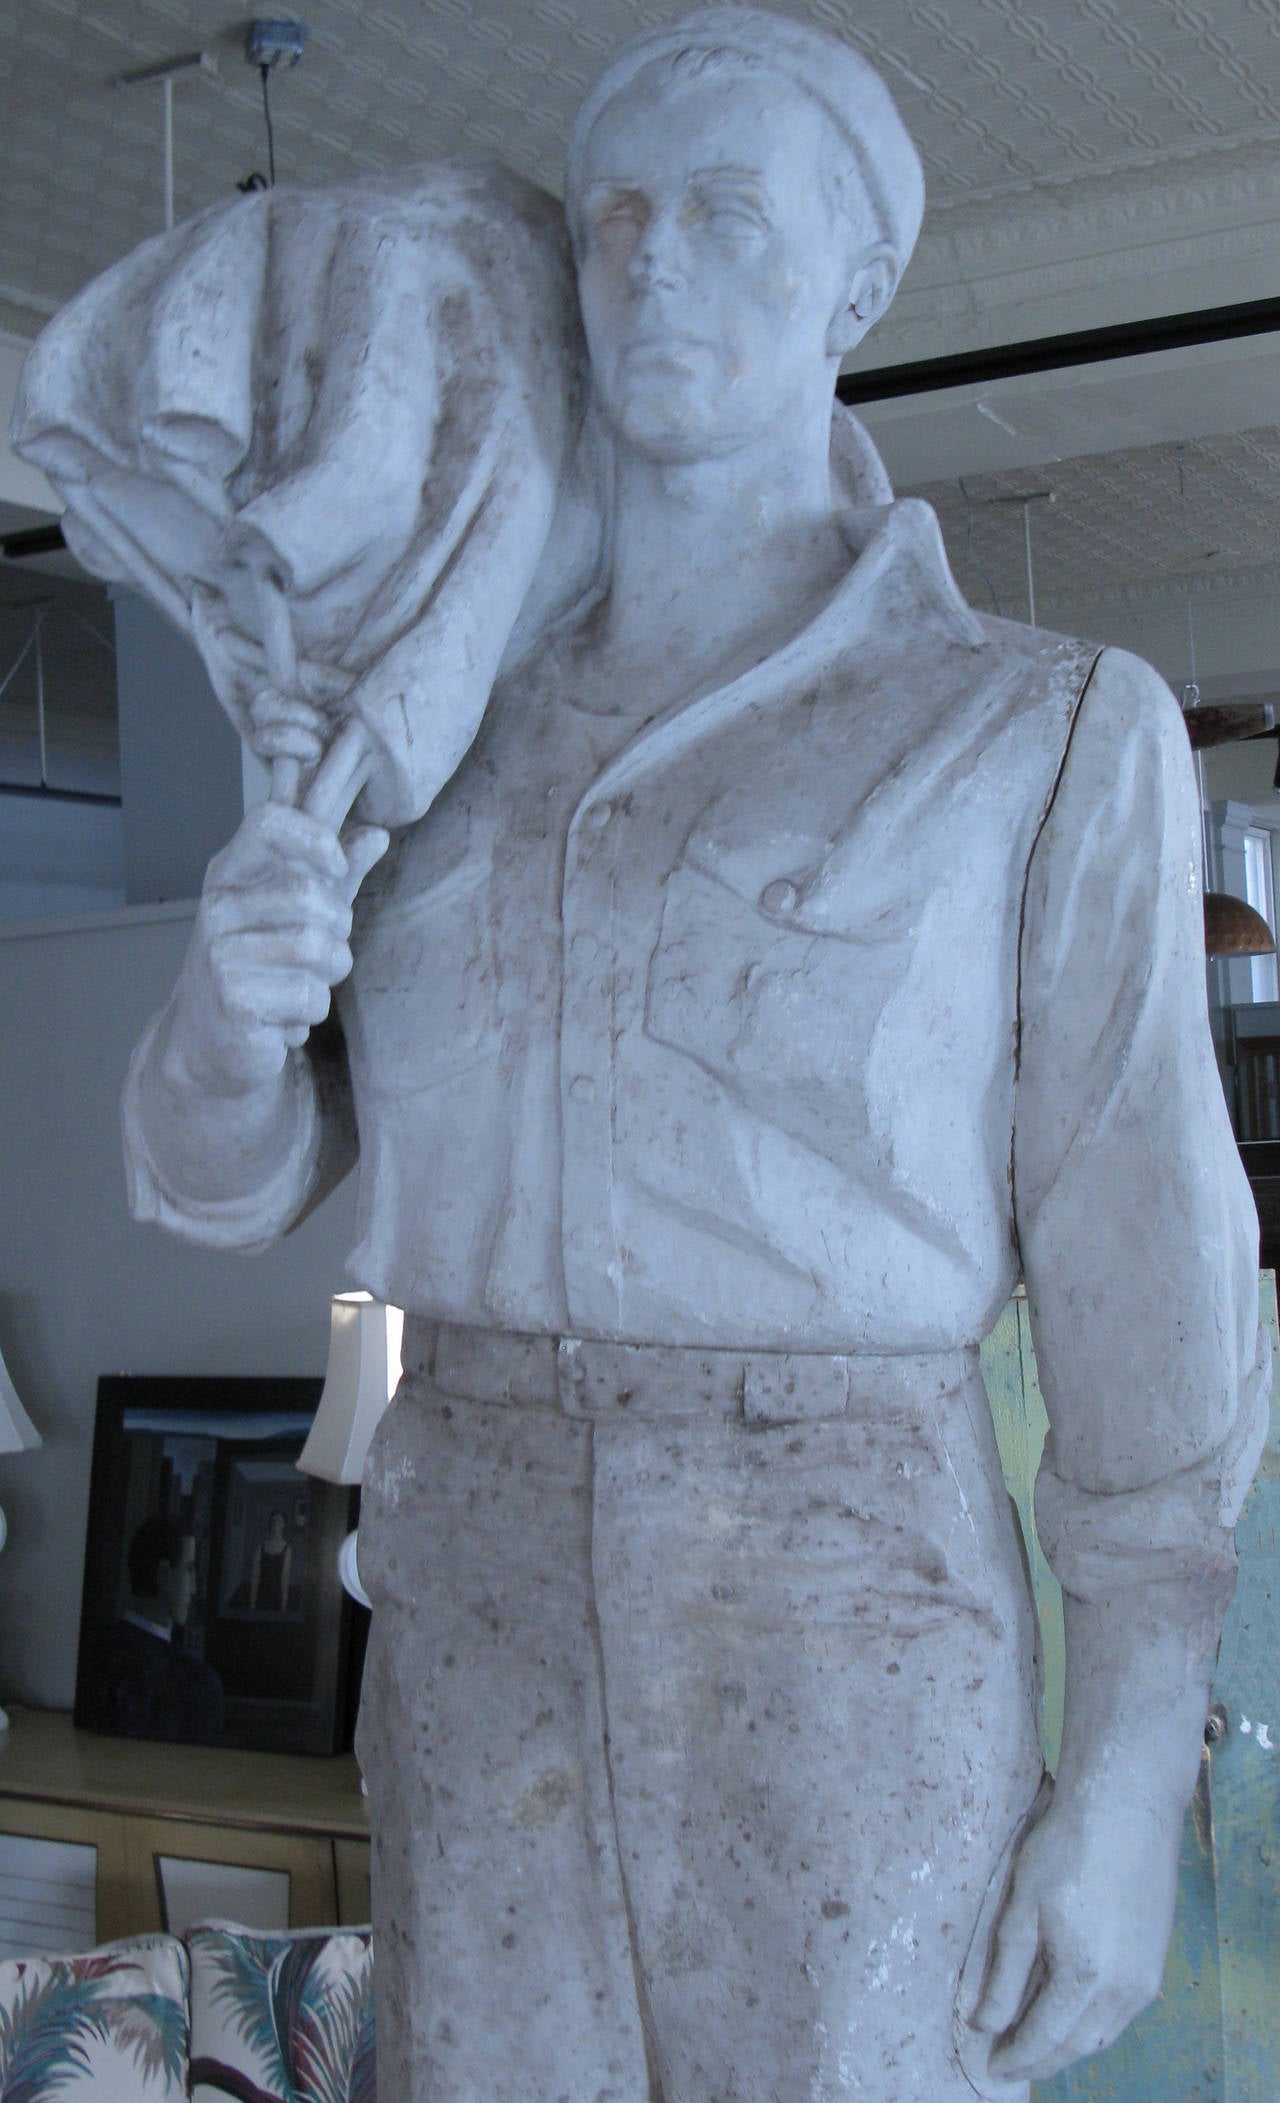 American Larger than Life Sized Plaster Sailor by Charles Rudy